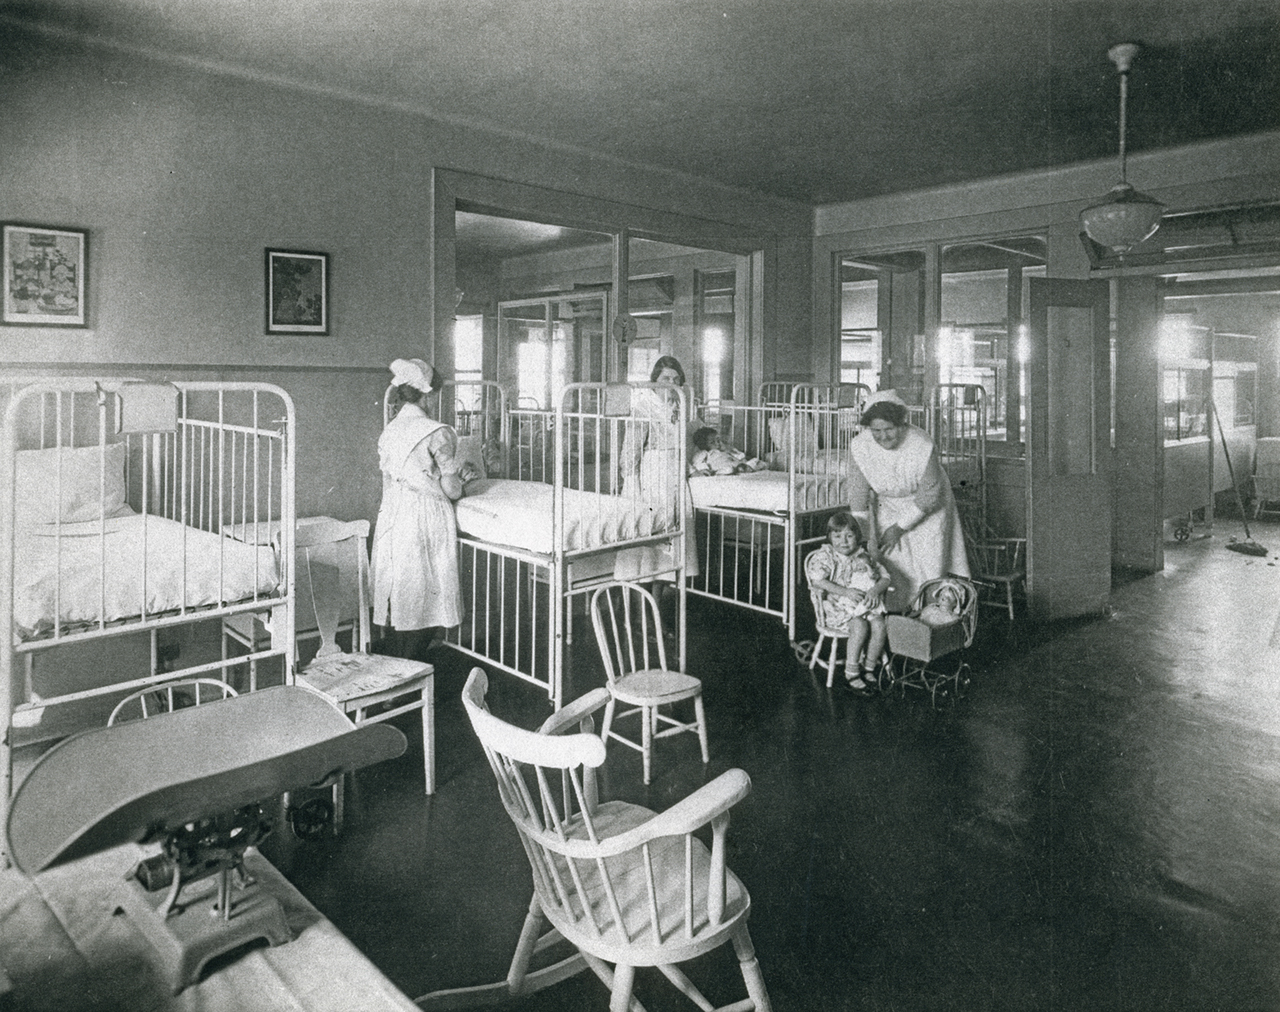 The children's ward at Delaware Hospital, which opened in 1910